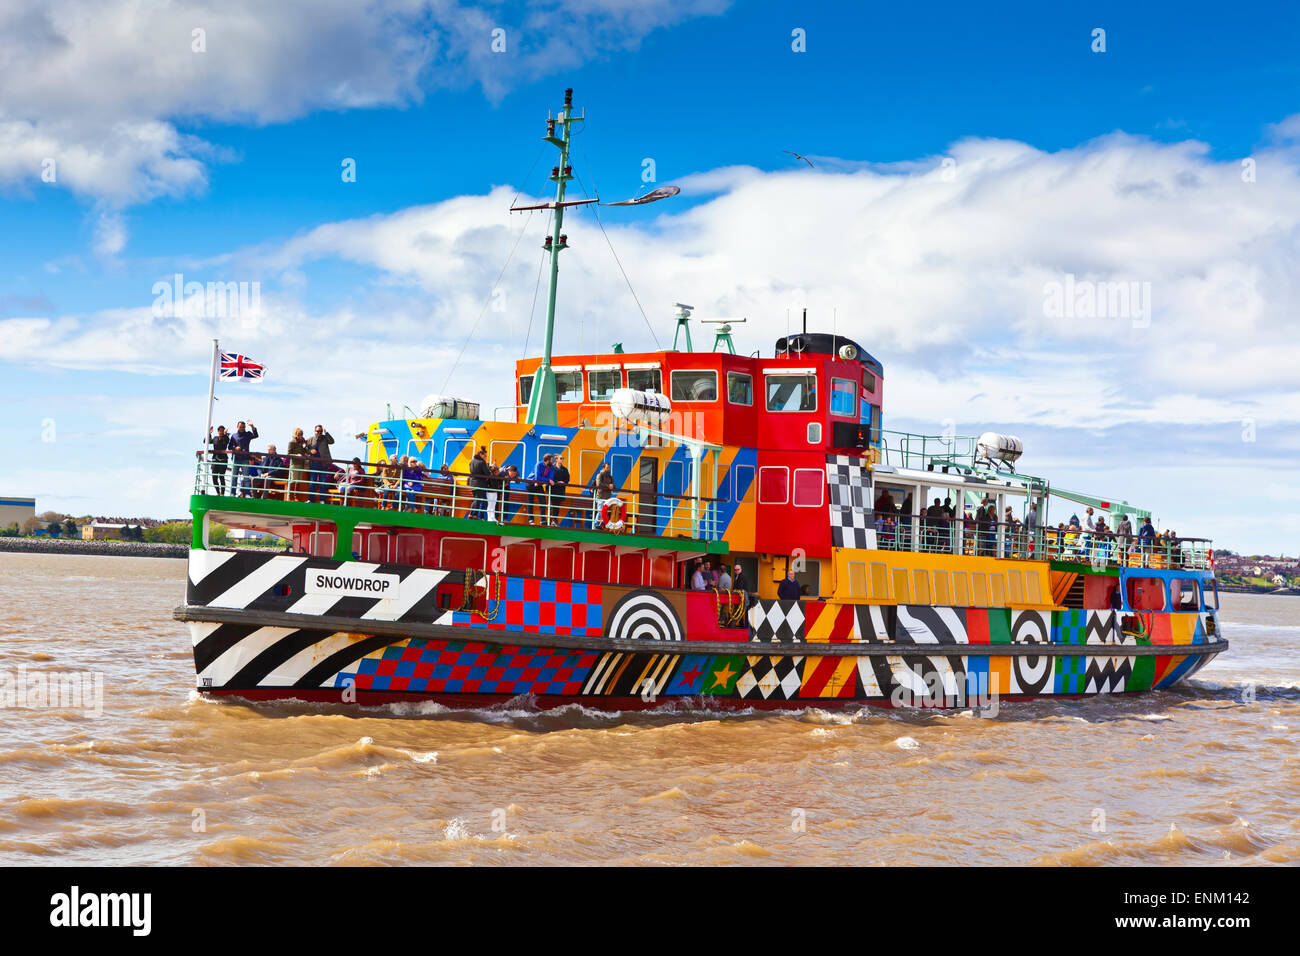 The Mersey ferry Snowdrop with its new ‘dazzle’ paintjob created by Sir Peter Blake in homage to the 1st World War's camouflage. Stock Photo